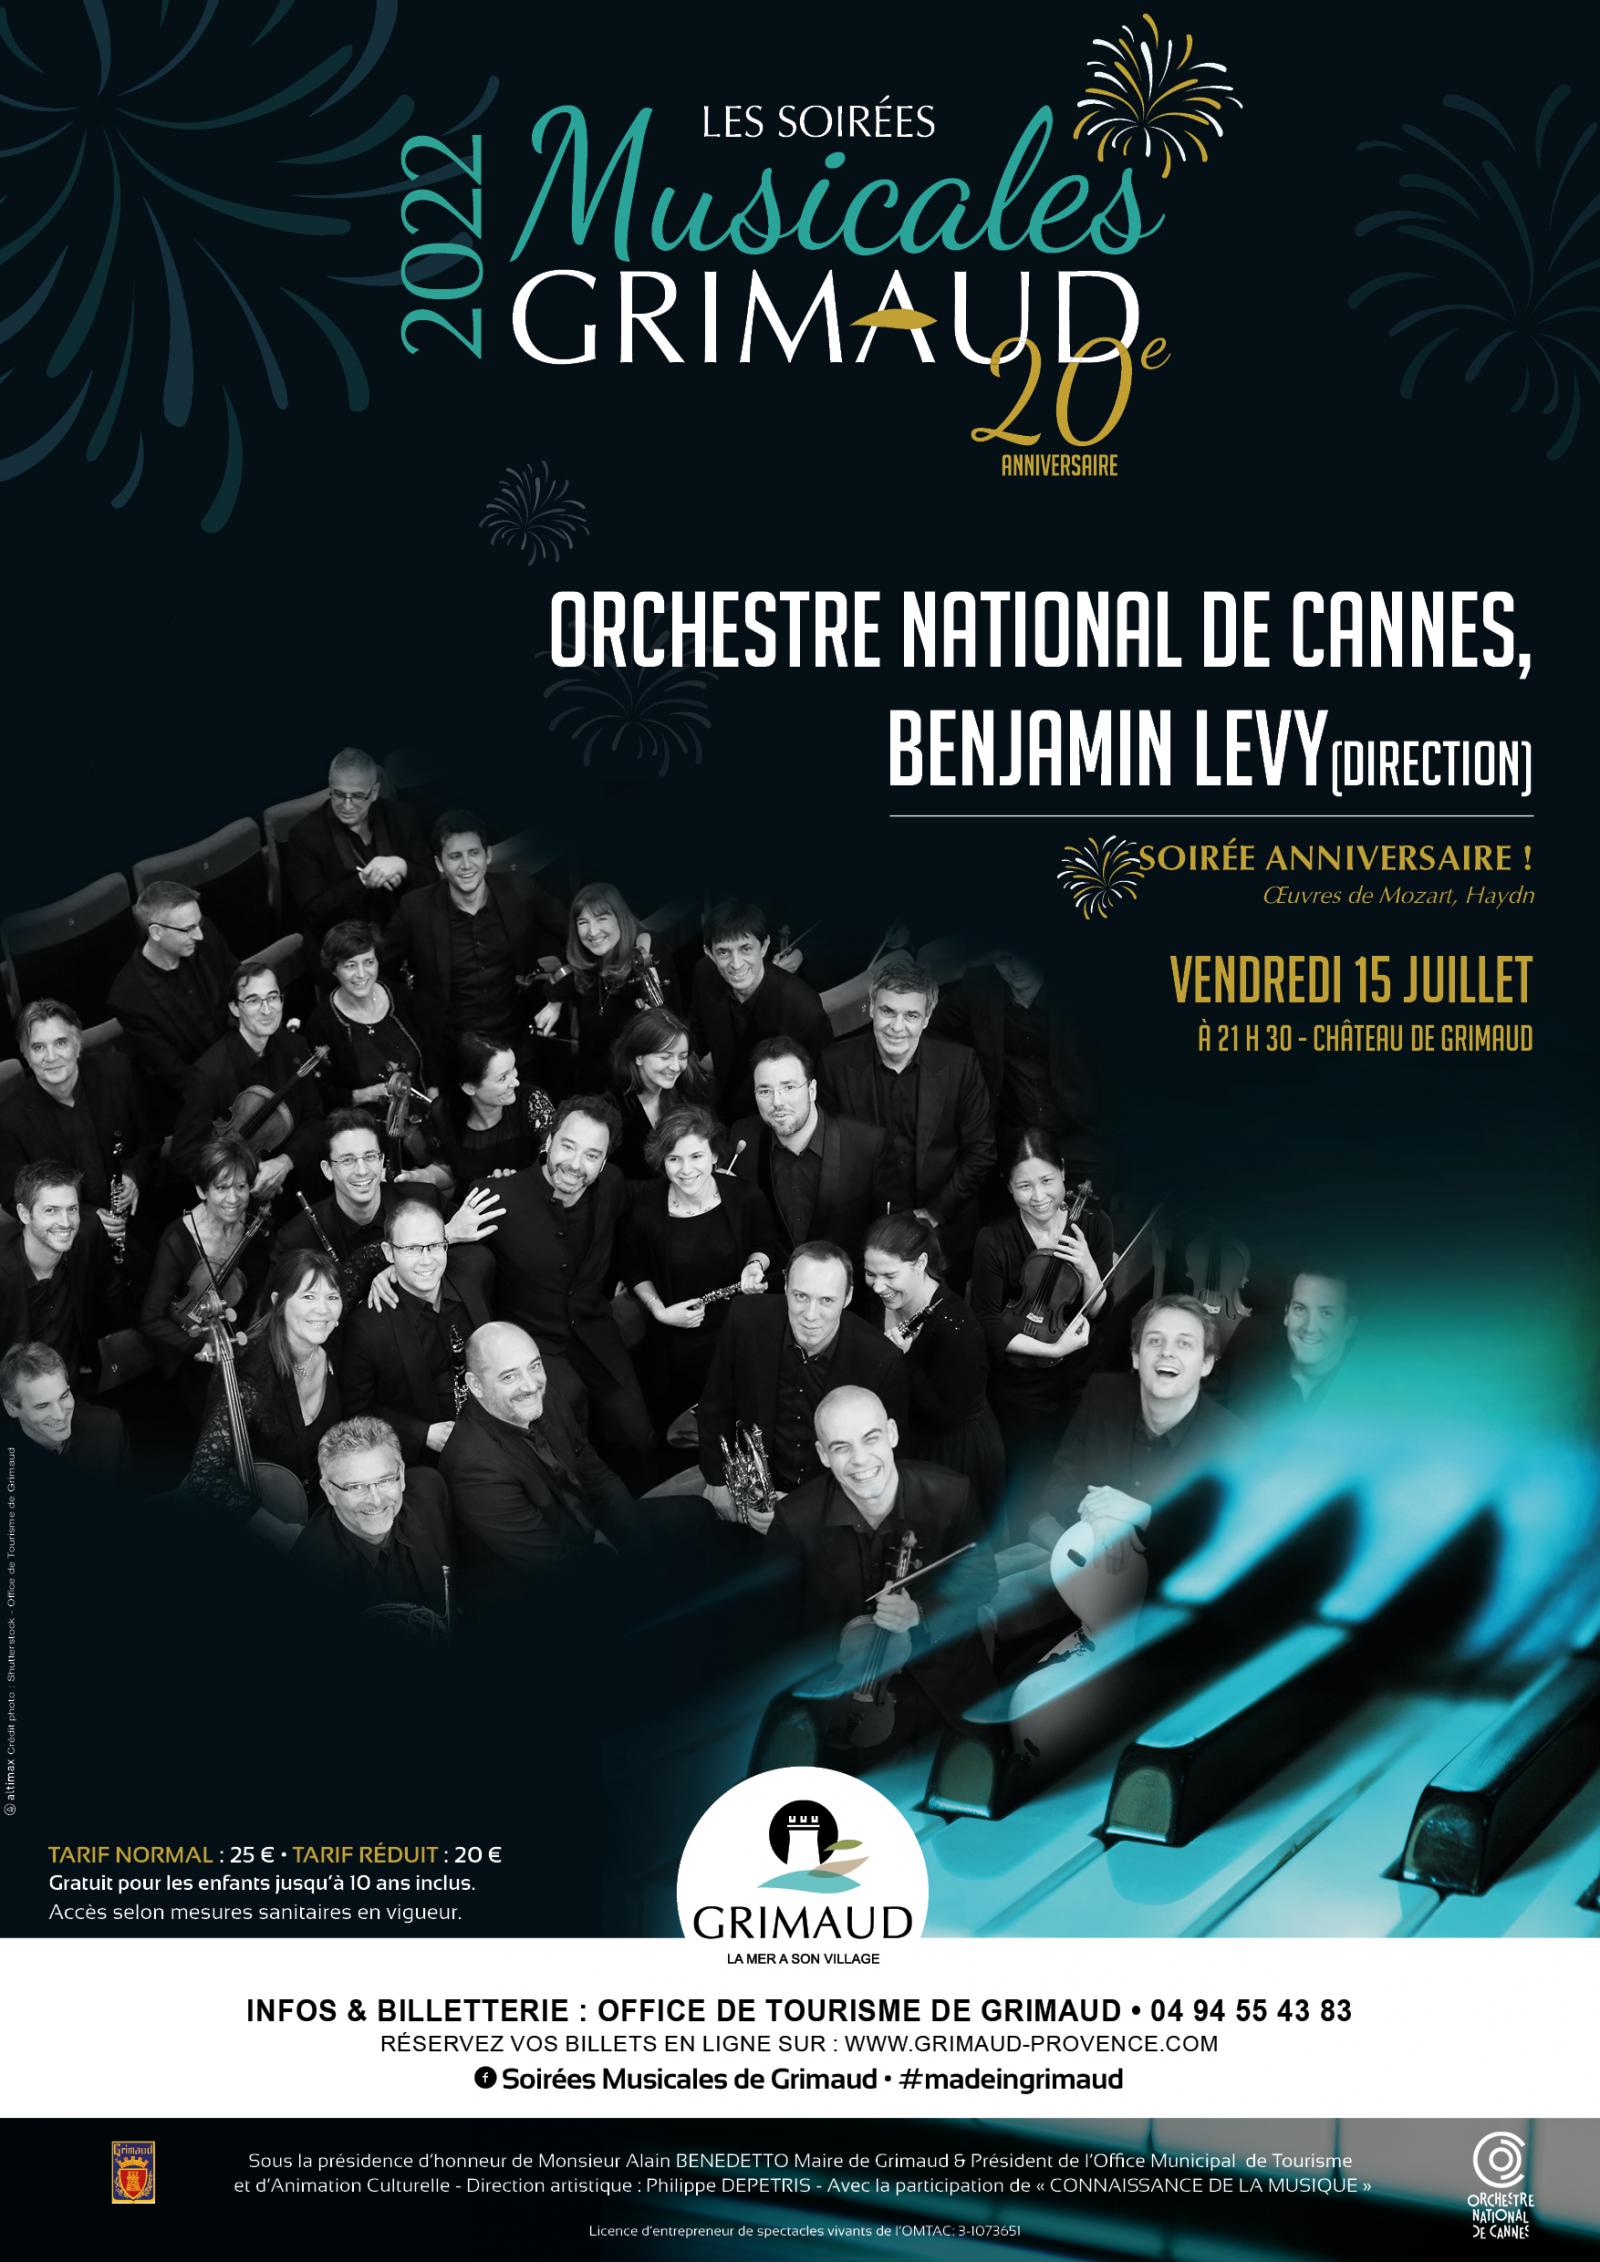 Friday July 15, 2022 at 9.30 p.m. - 20 years of Grimaud musical evenings